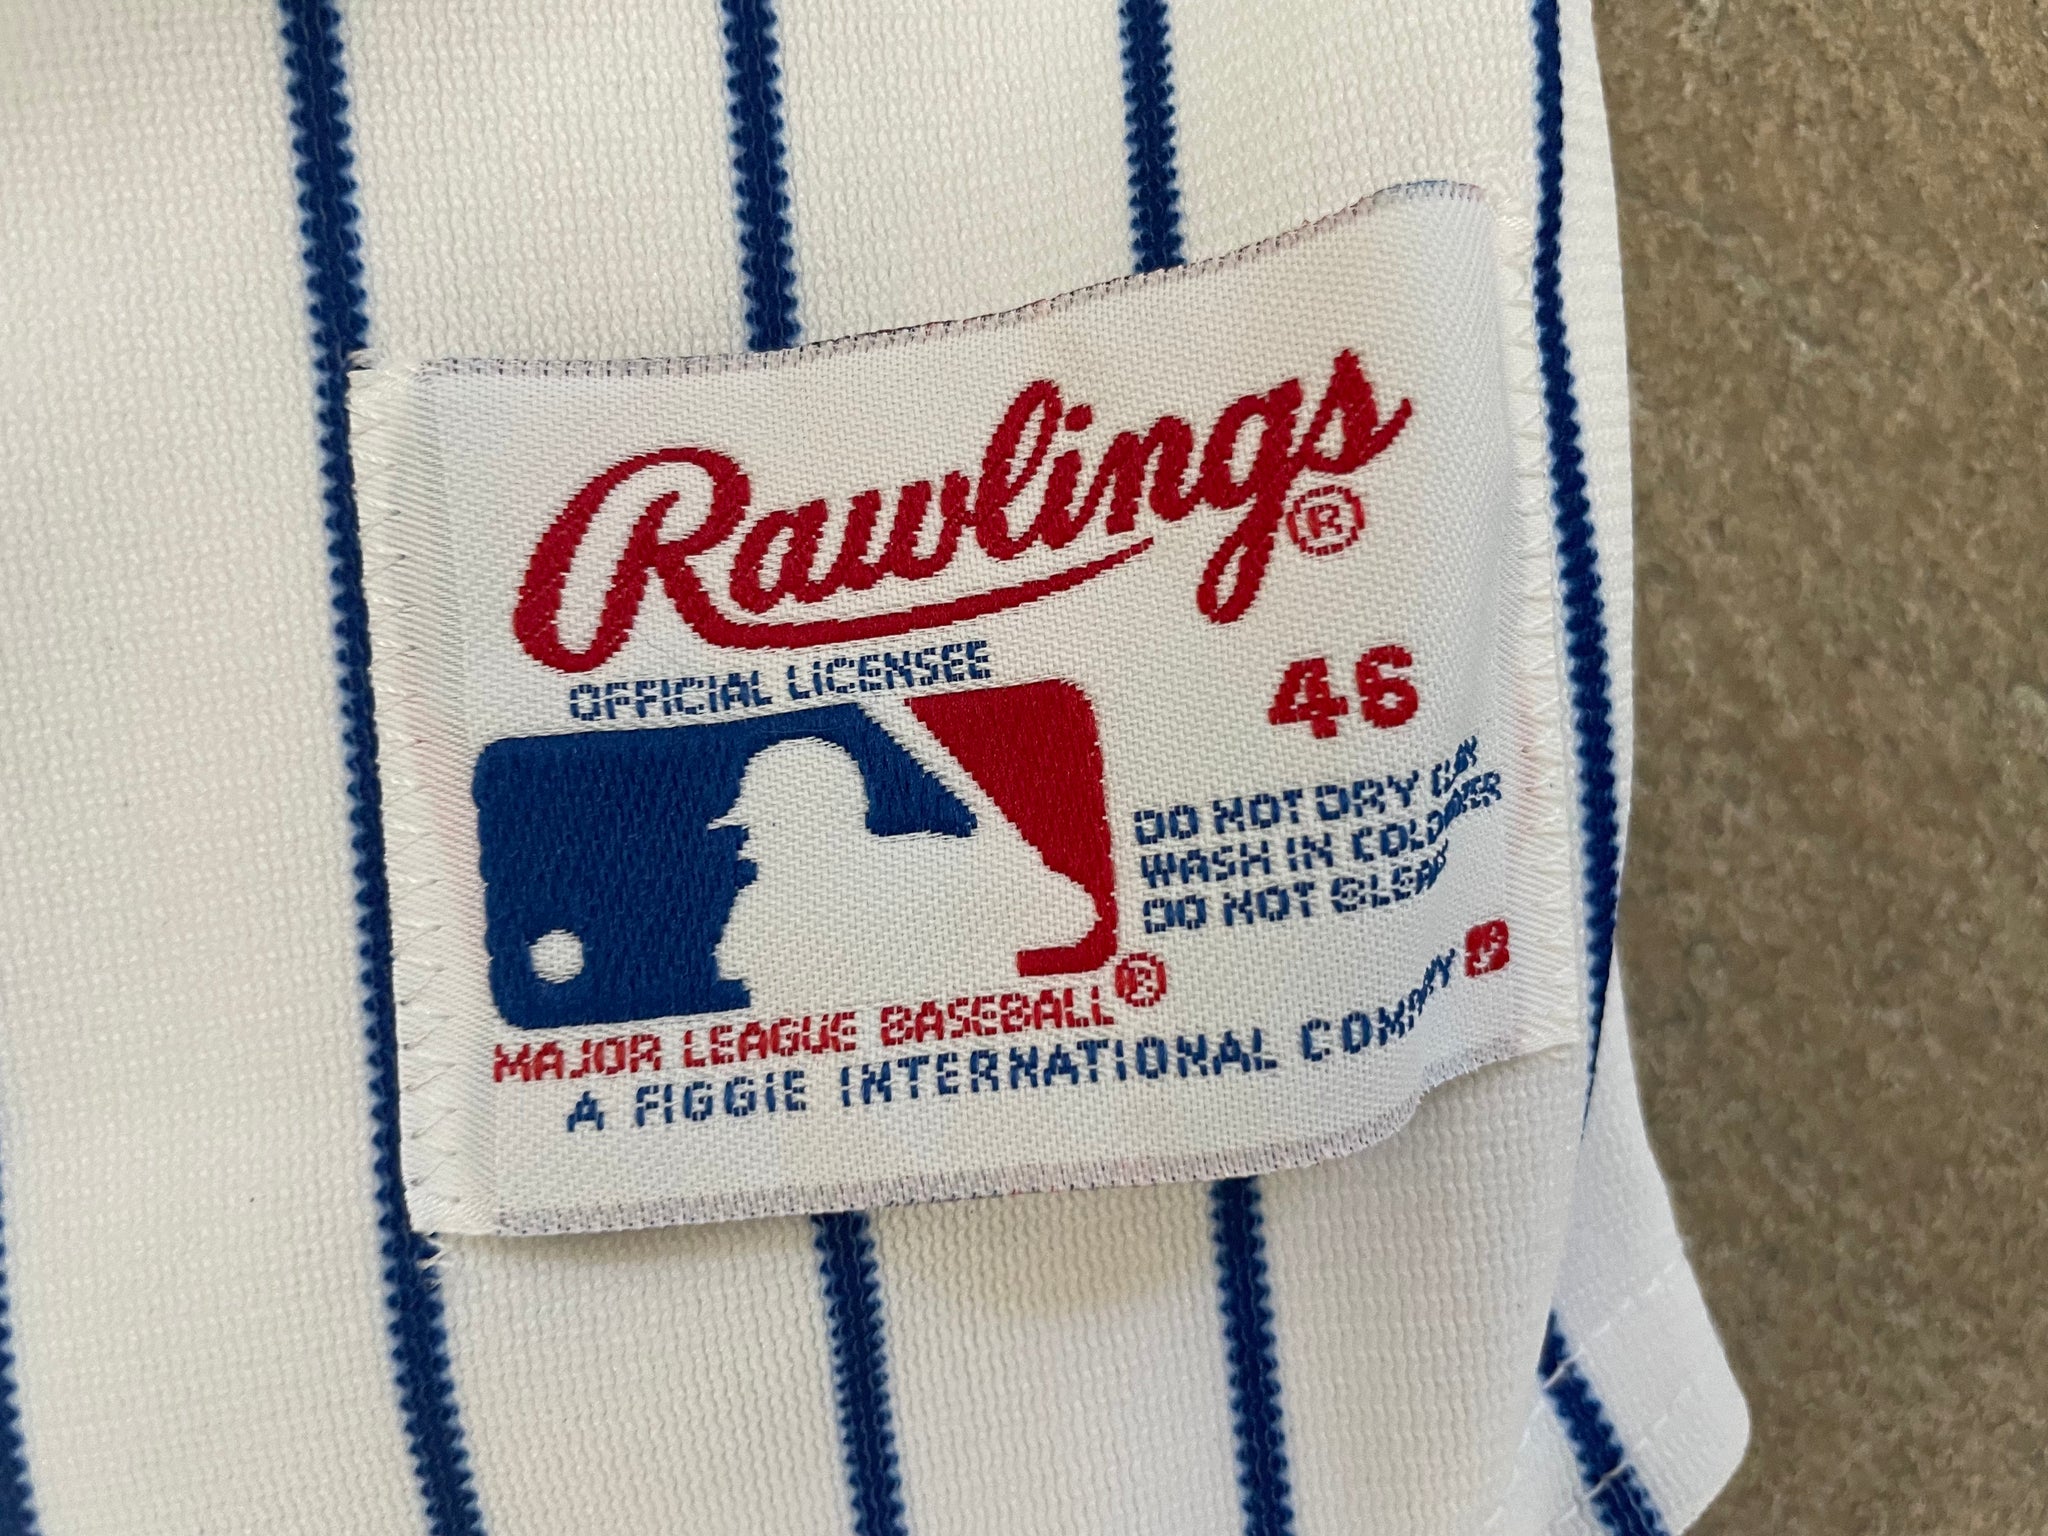 Chicago Cubs Authentic Rawlings MLB Baseball Vintage Jersey Men's 46